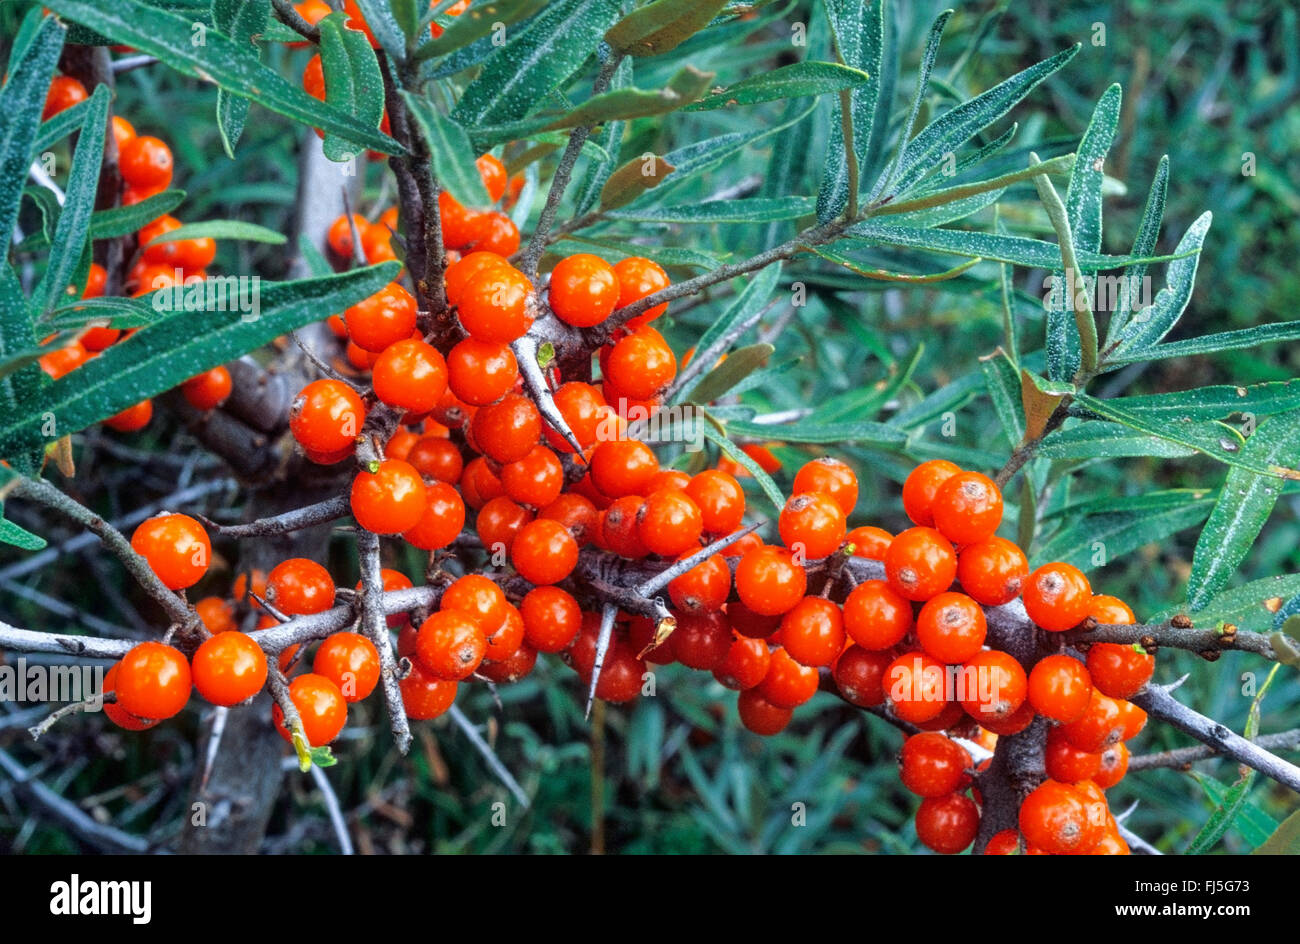 common seabuckthorn (Hippophae rhamnoides), branch with fruits, Germany Stock Photo